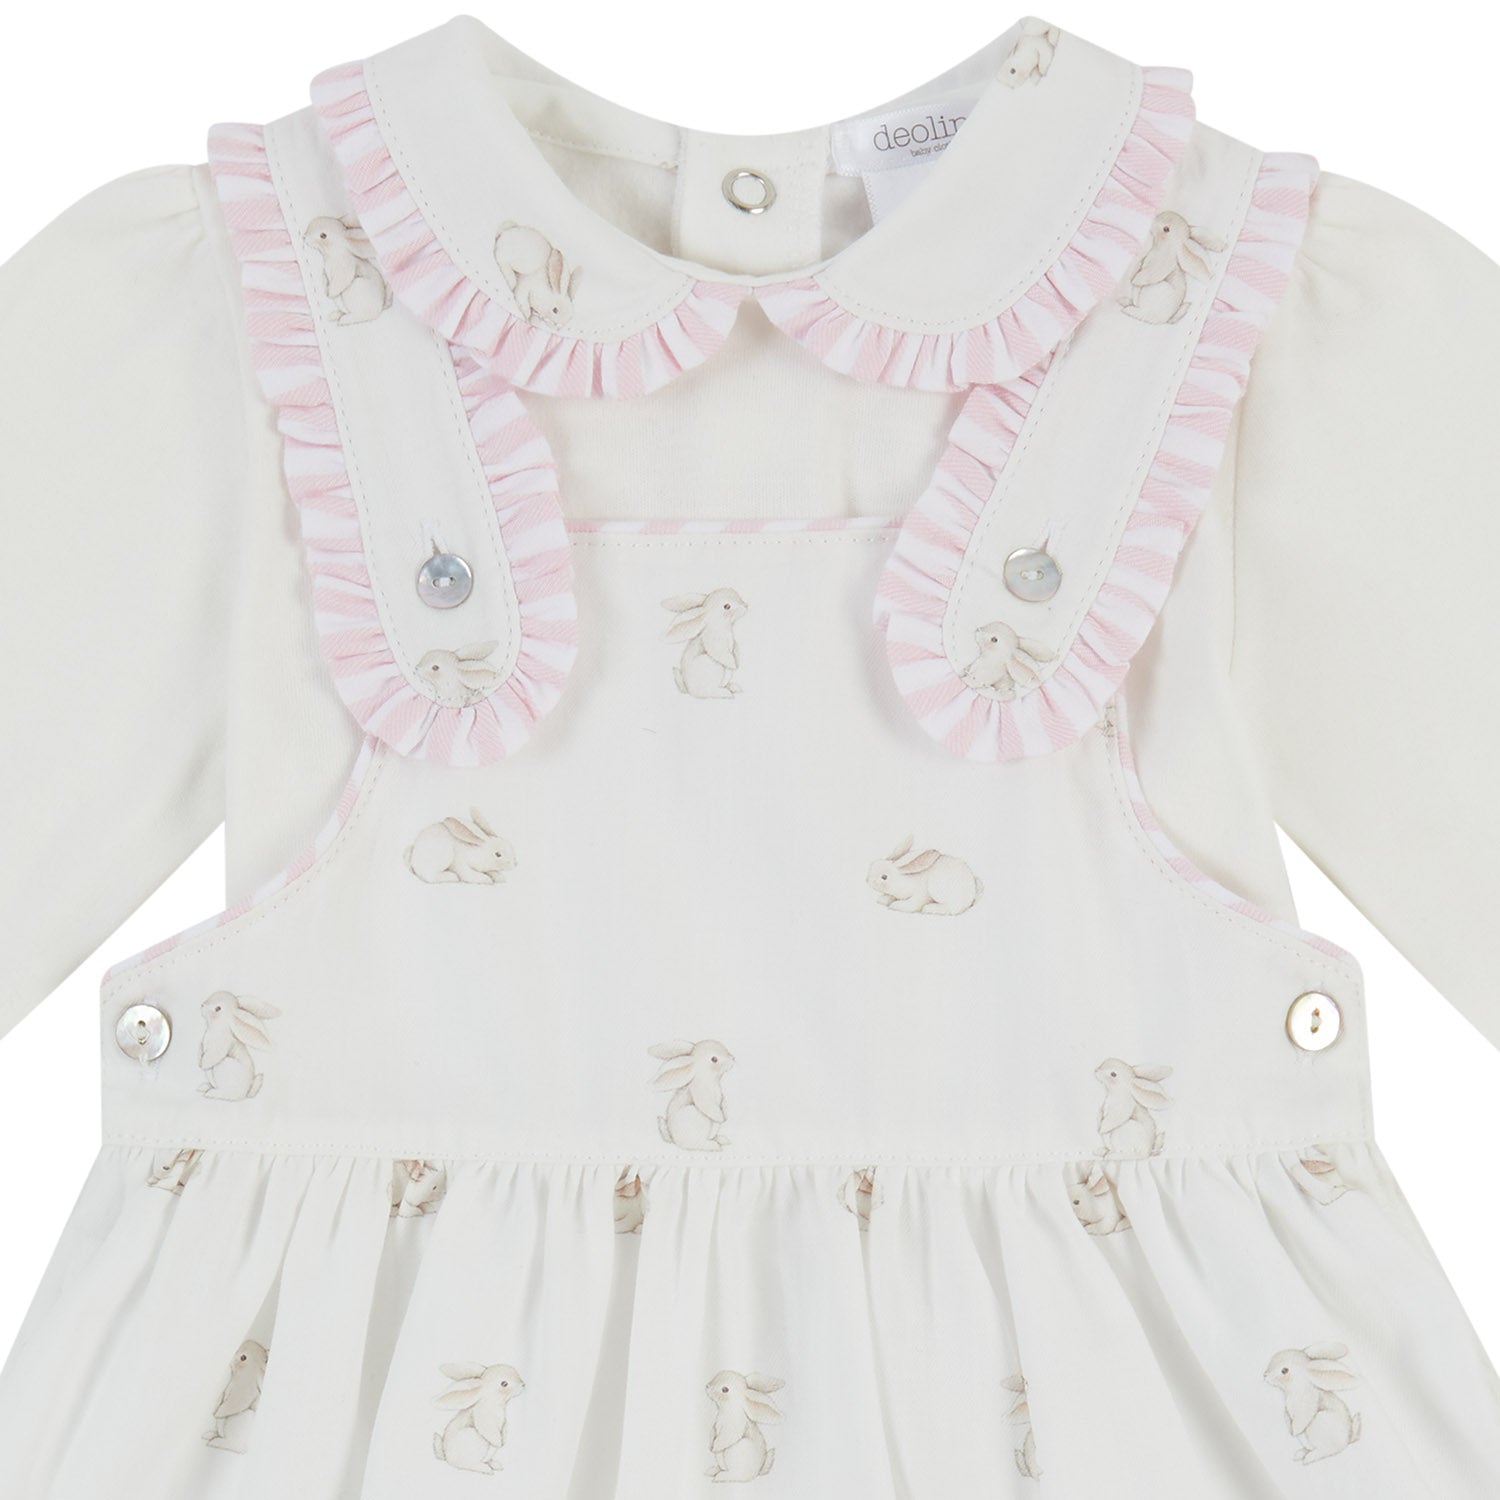 Pink Bunny Pinafore Outfit